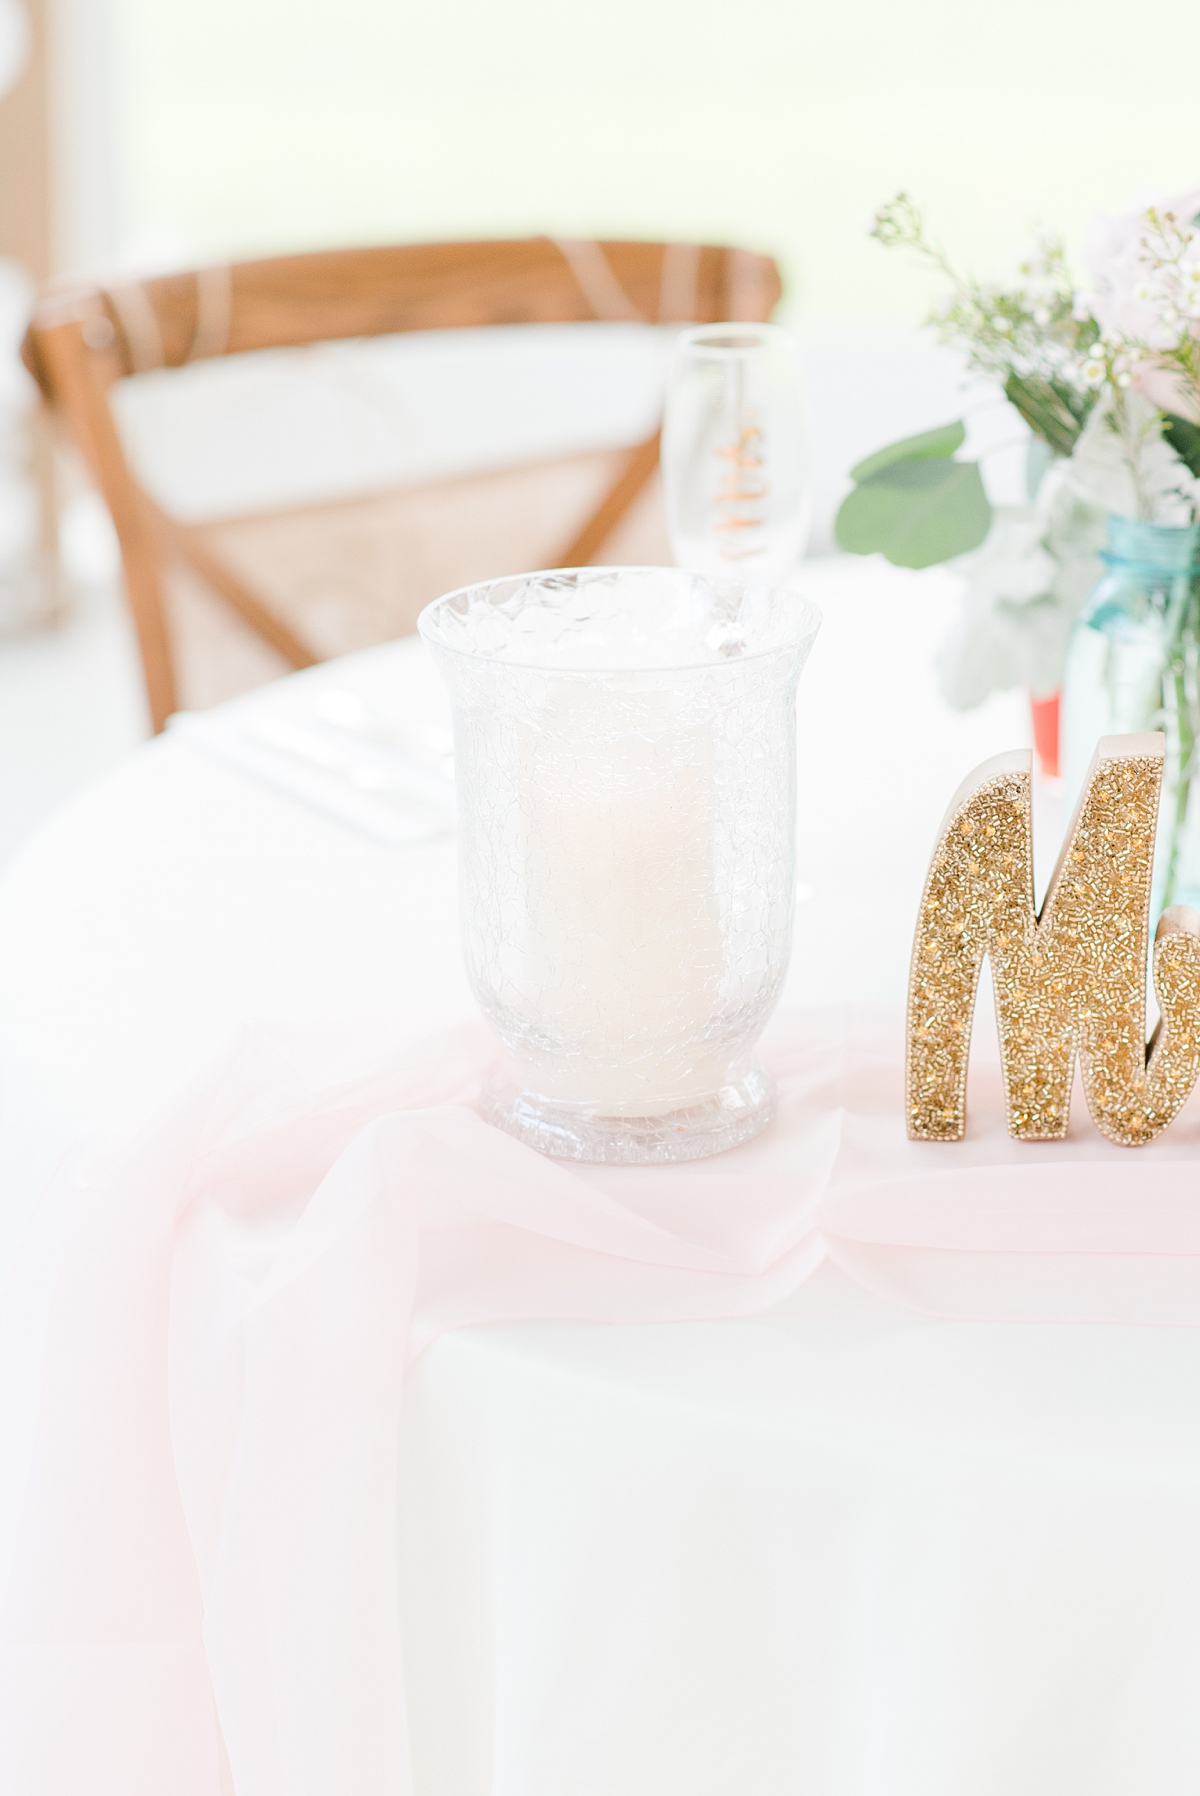 Simple and Elegant Bride and Groom Table at Arbor Haven Summer Wedding Reception. Wedding Photography by Virginia Wedding Photographer Kailey Brianne Photography. 